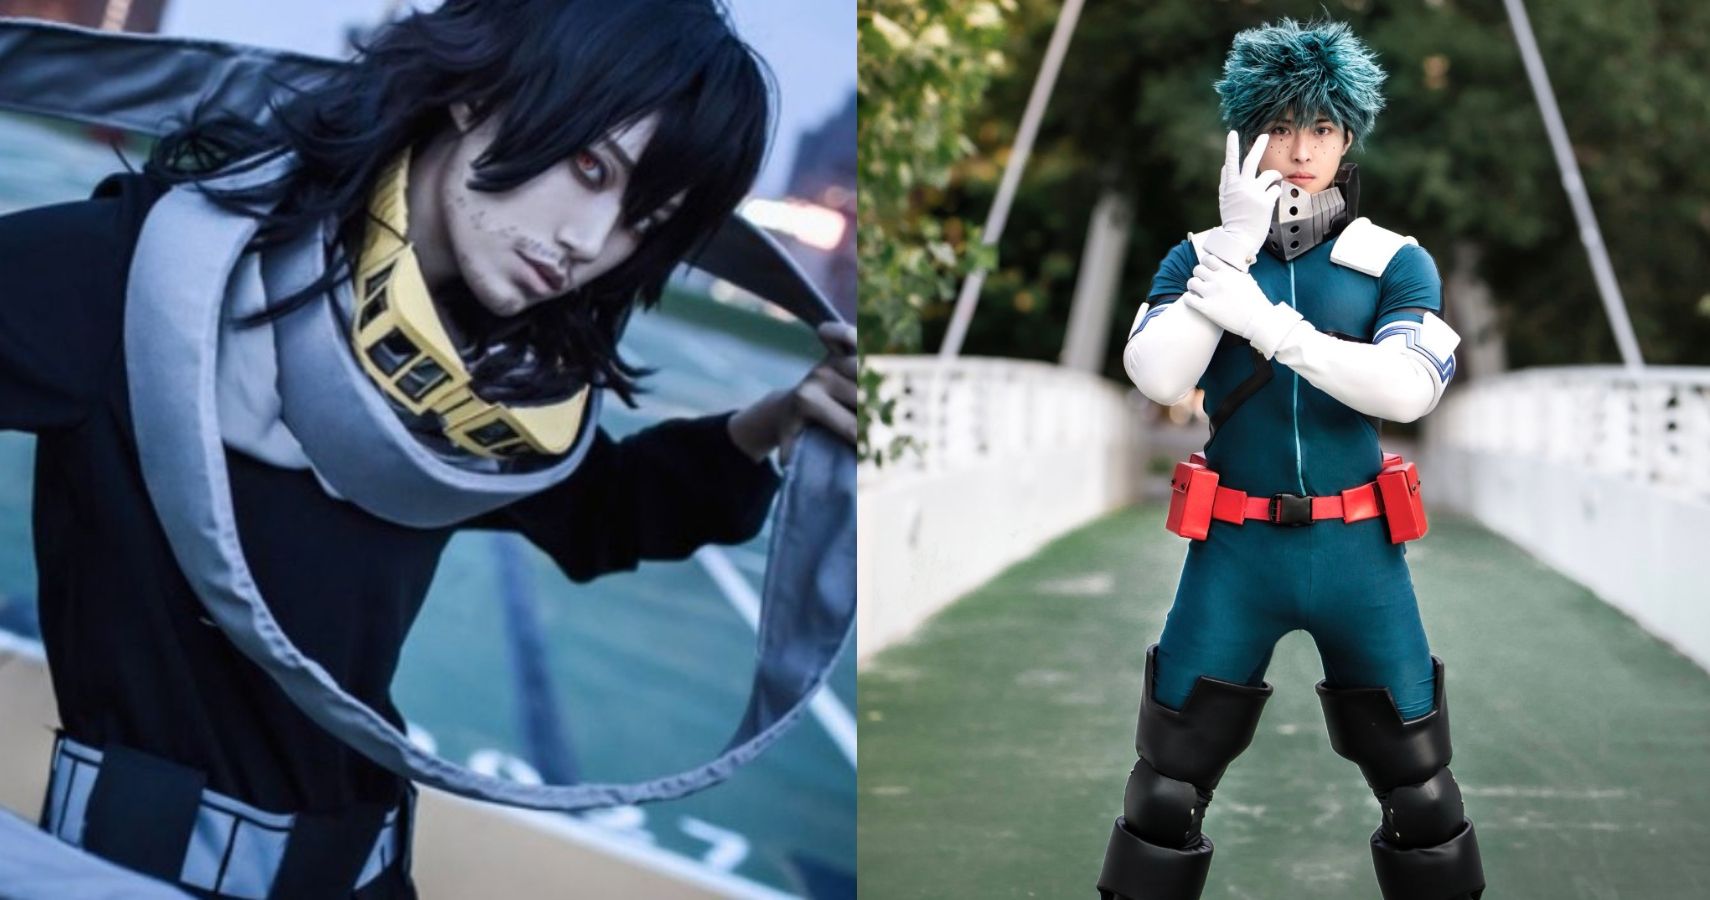 The 15 Hardest Anime Cosplay To Convincingly Pull Off